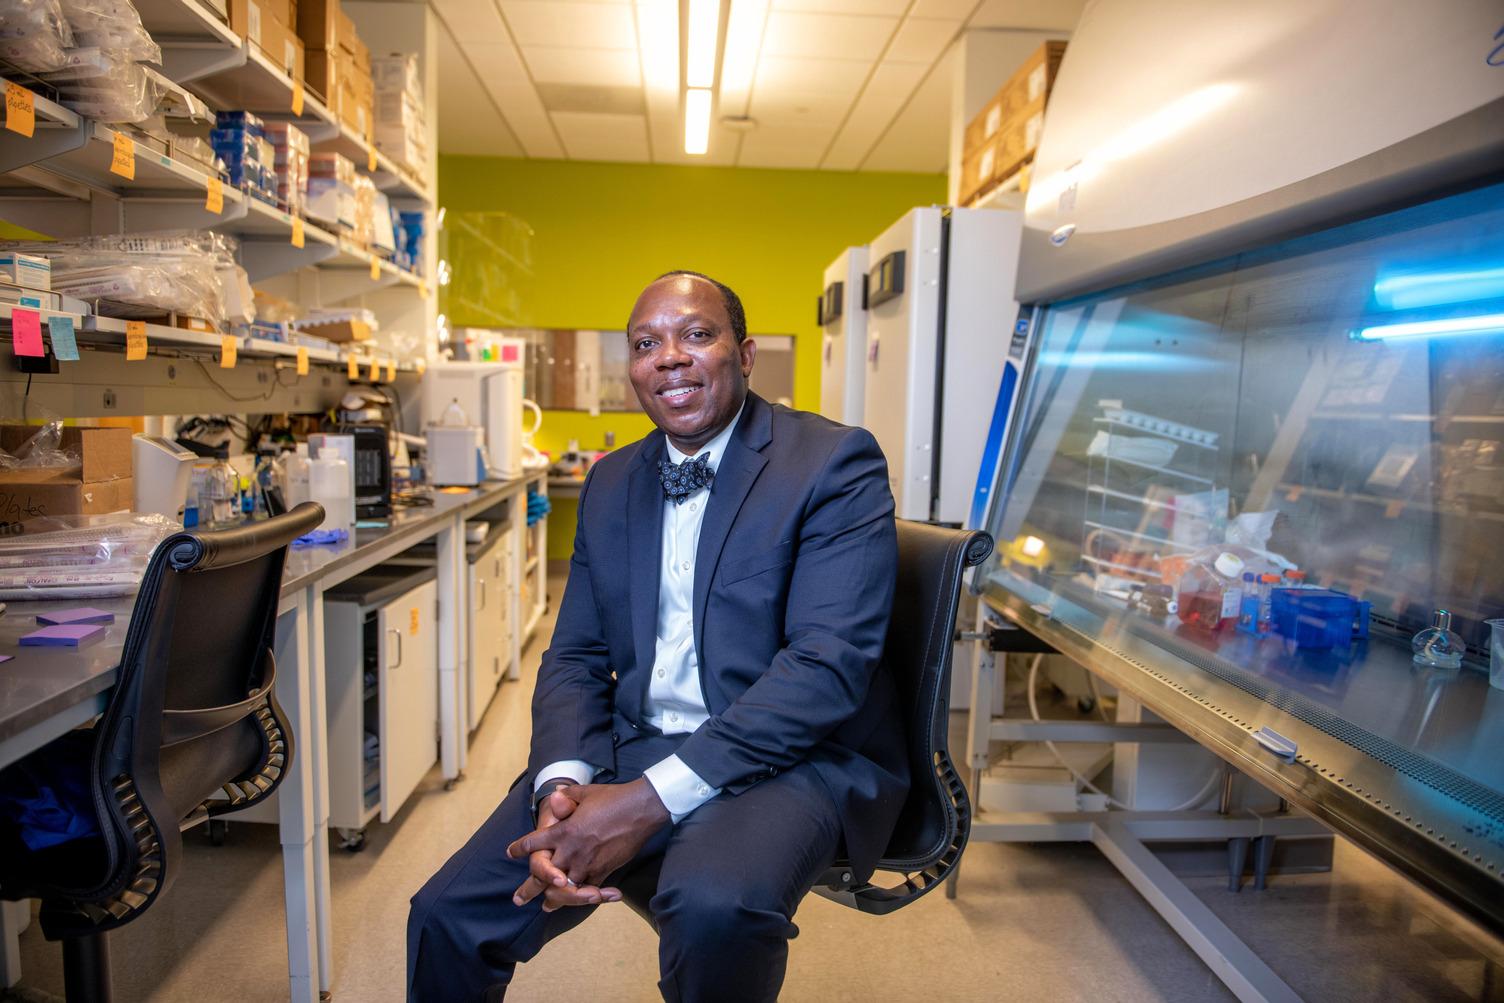 Evaristus Nwulia, MD, MHS, professor of psychiatry and behavioral sciences as well as the director of the Translational Neuroscience Laboratory